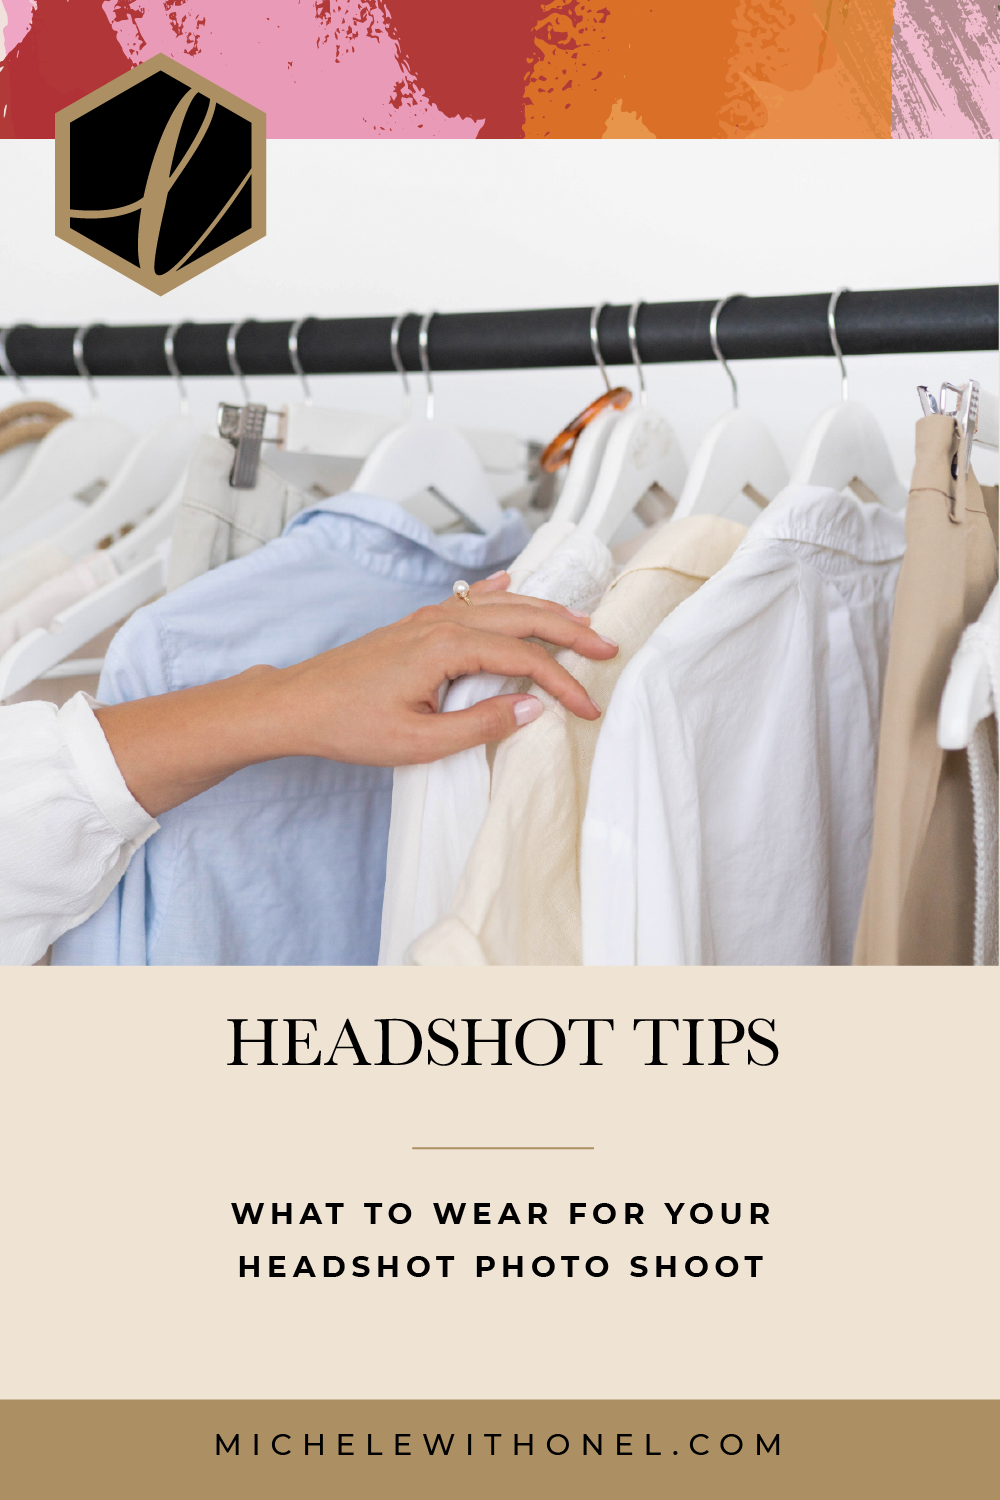 Ever struggle with what to wear for your headshot session? If so, these headshot tips are for for you! Start reading to find out what color to wear, what sleeve length works best, how much makeup to wear, and more! #headshots #whattowear #businessheadshots #wardrobe